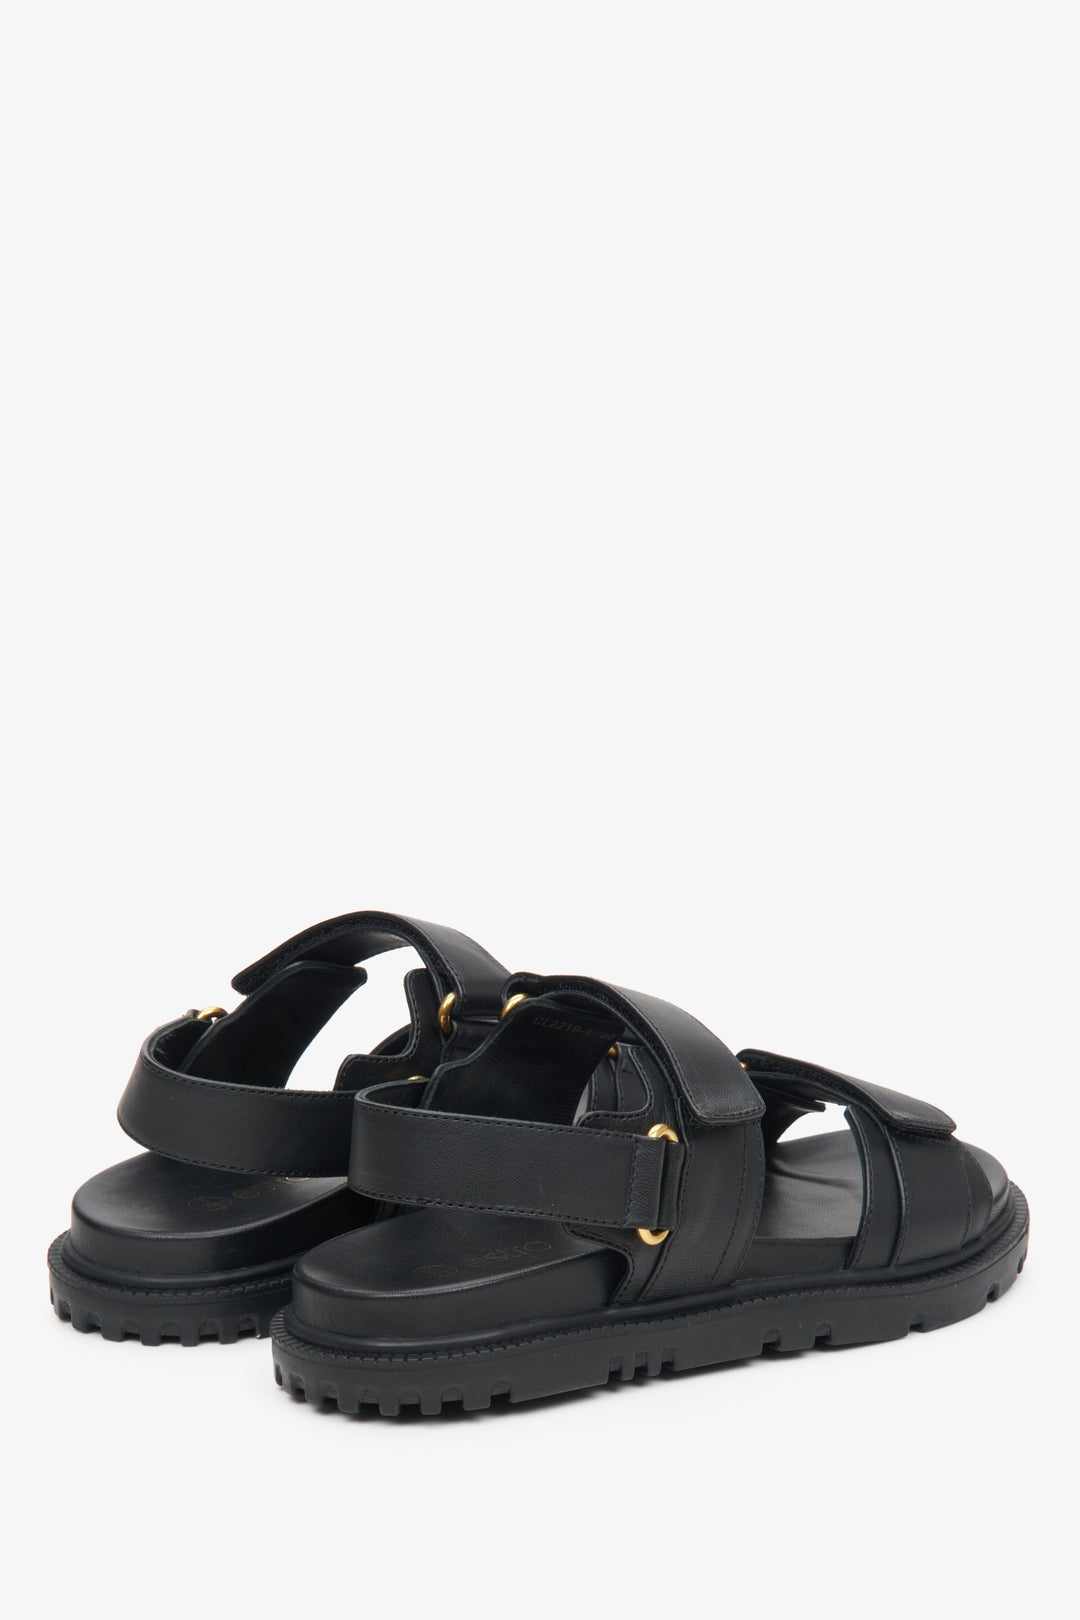 Women's black leather  sandals with a soft sole and gold elements - close-up on the side and heel line.